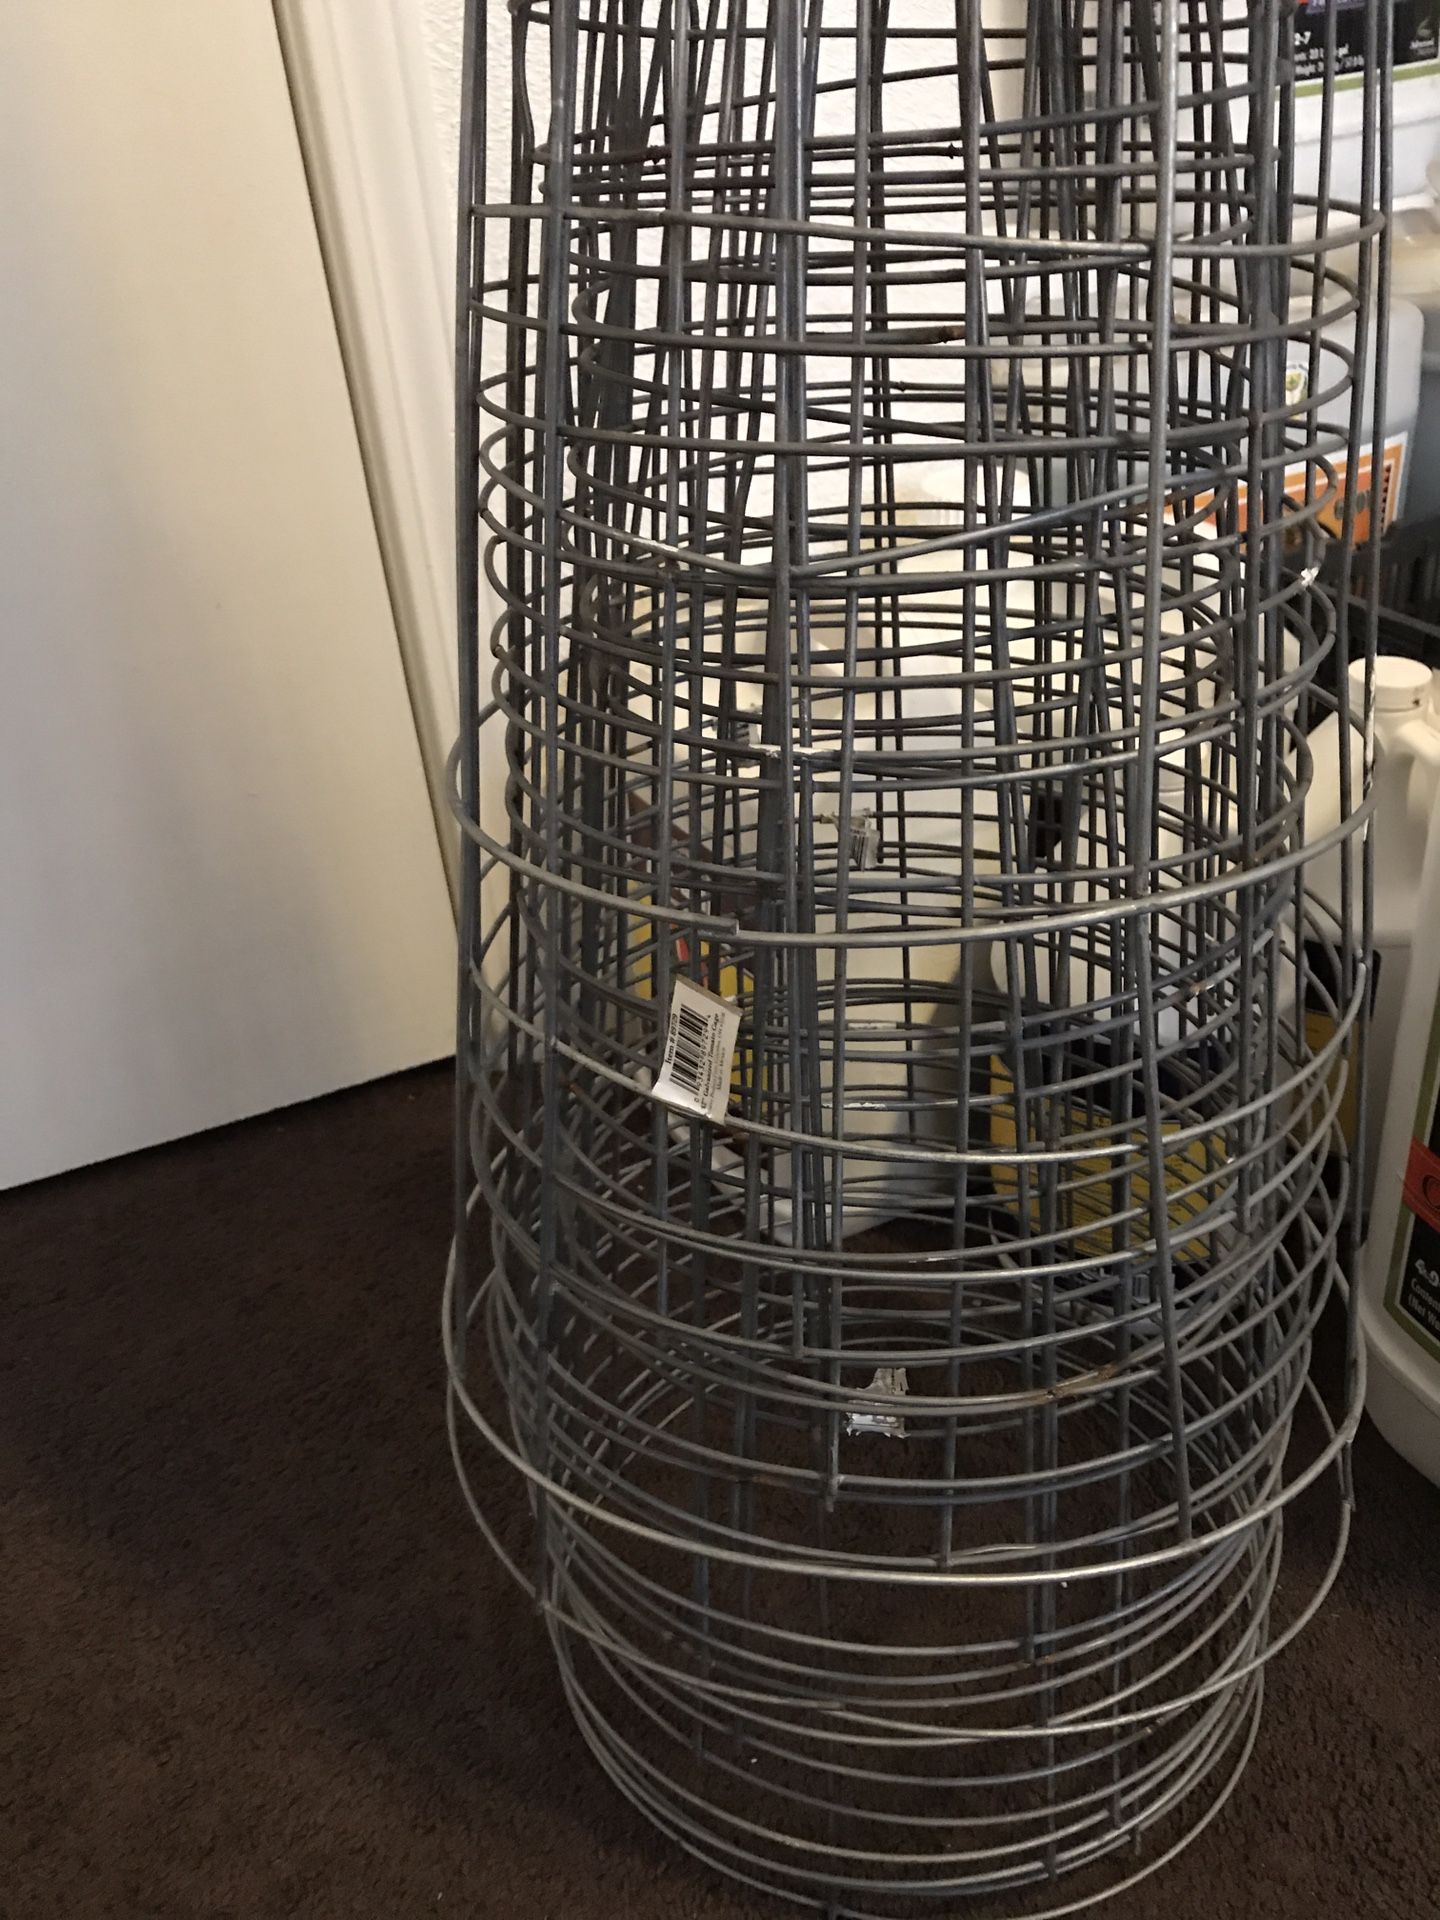 Tomato cages 42 inch